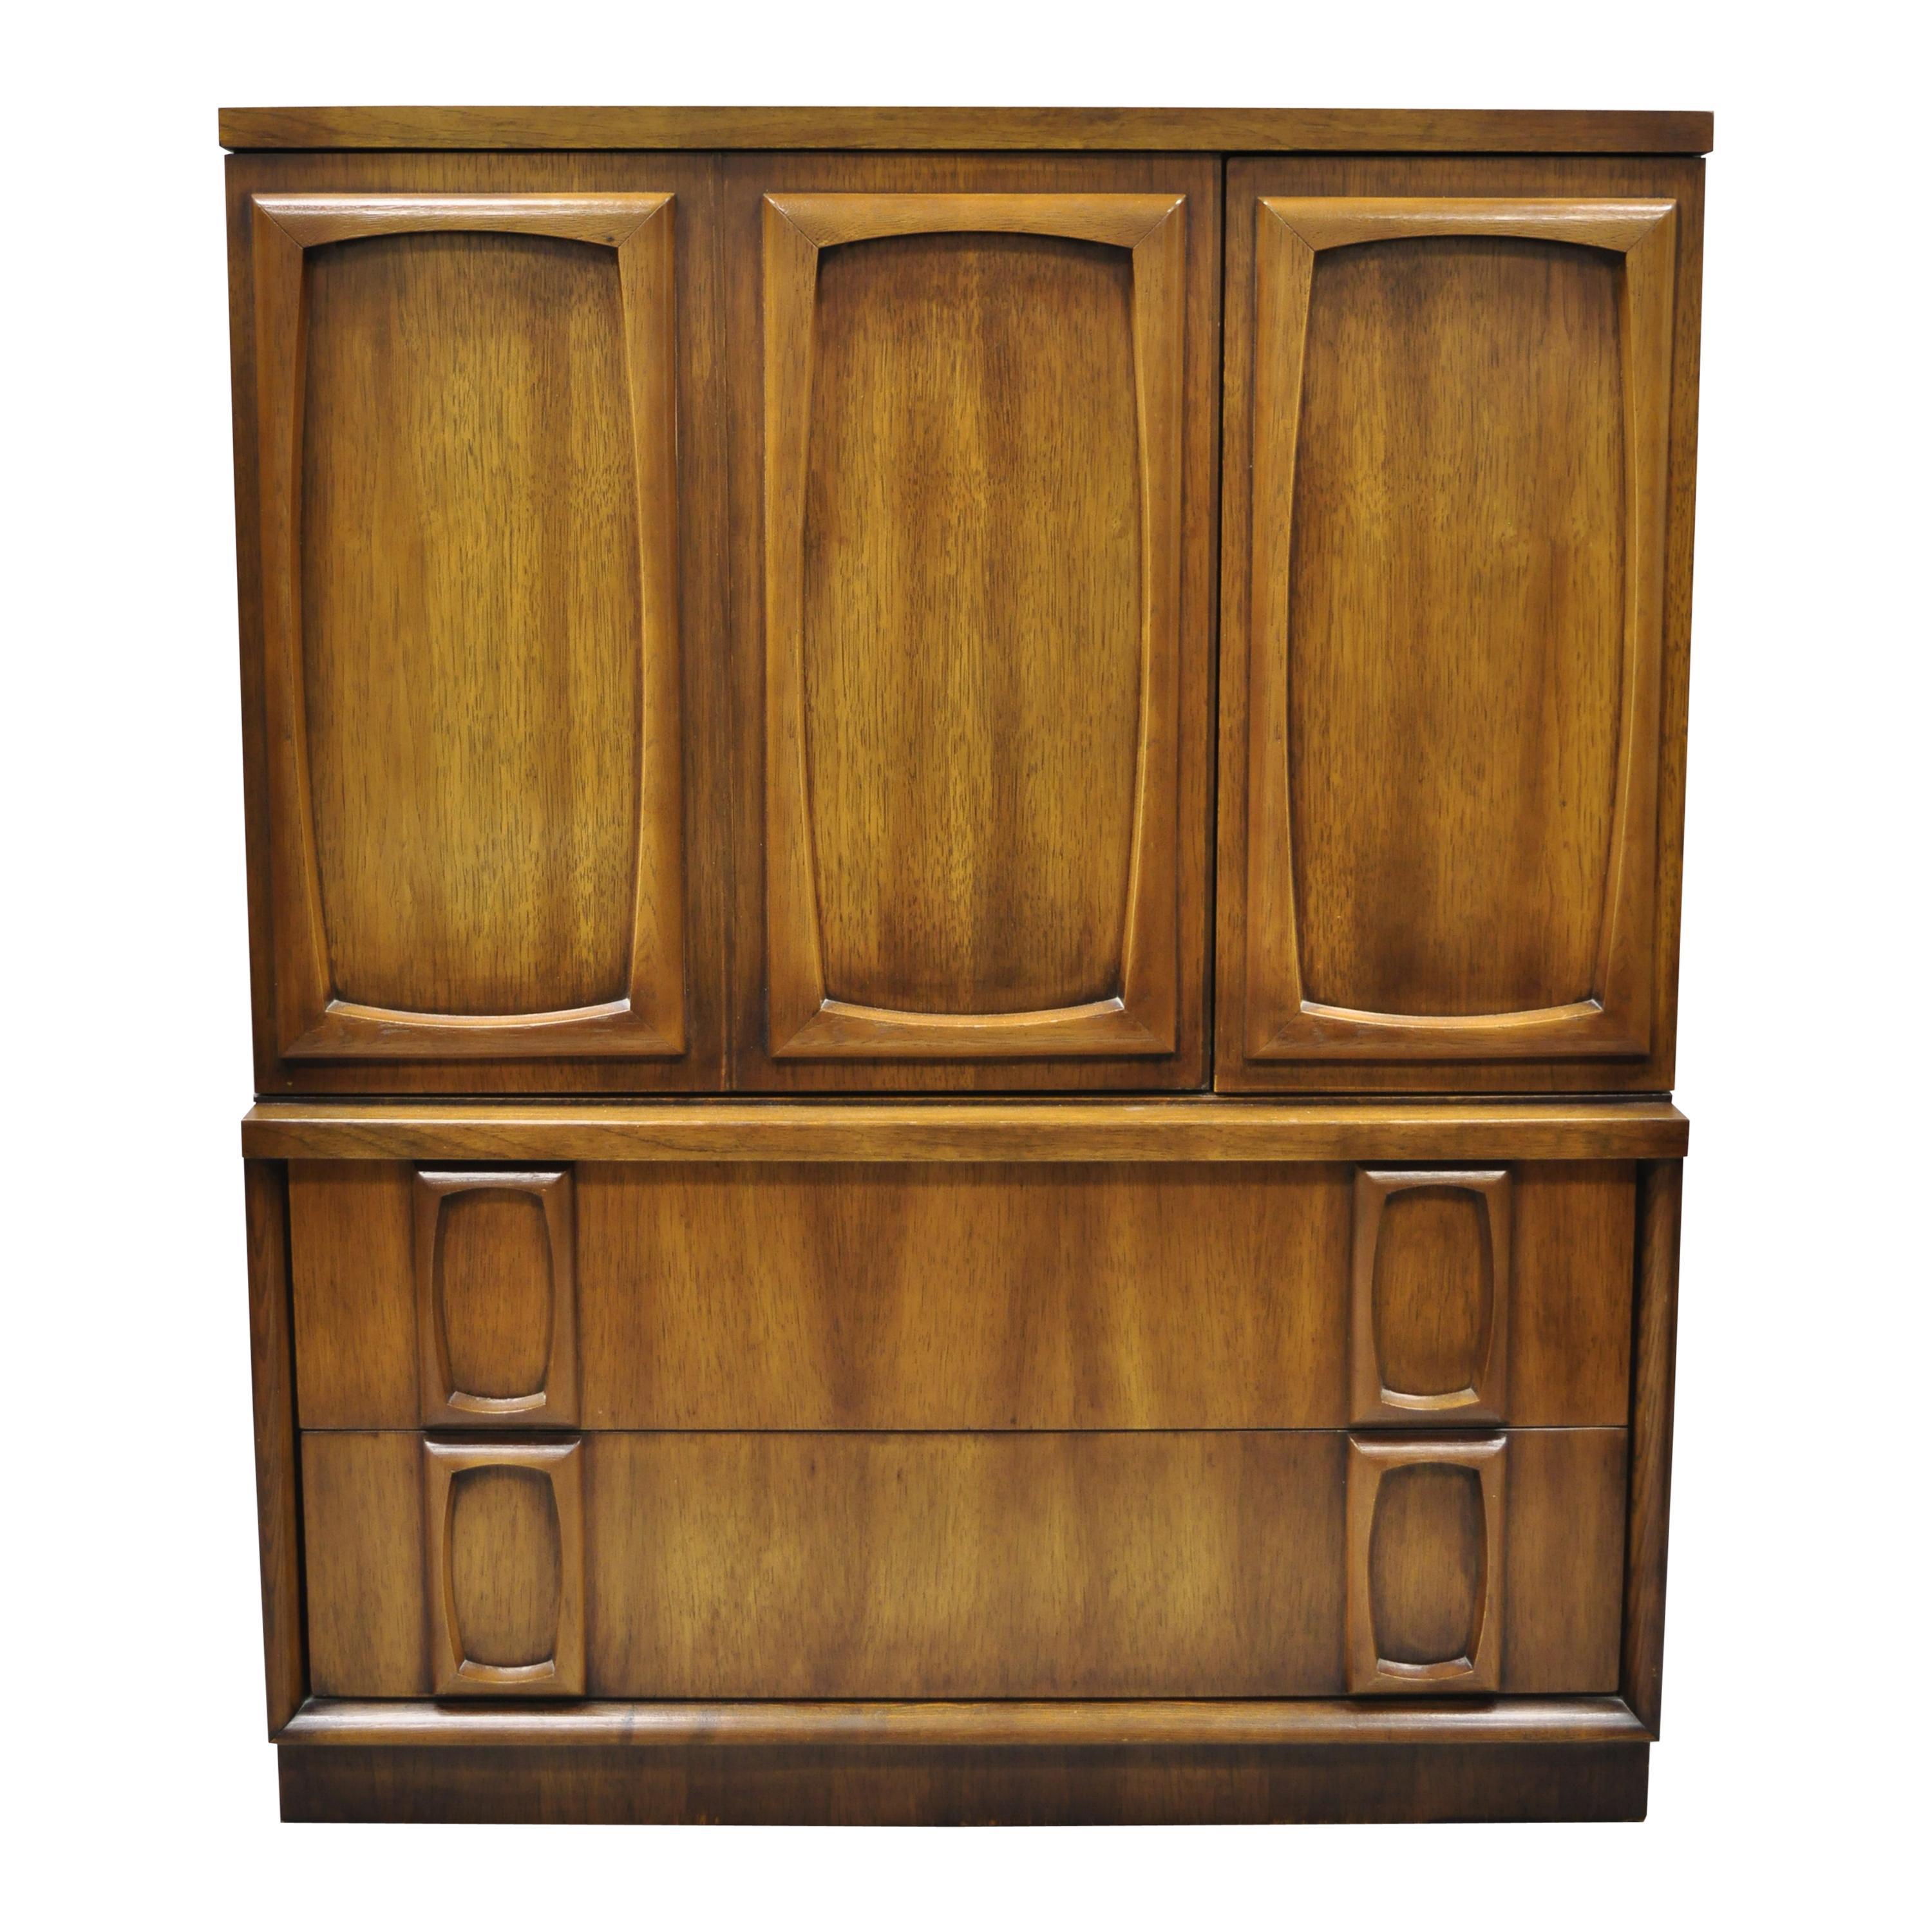 Vintage Mid-Century Modern Sculpted Walnut Tall Chest Dresser Armoire Cabinet For Sale